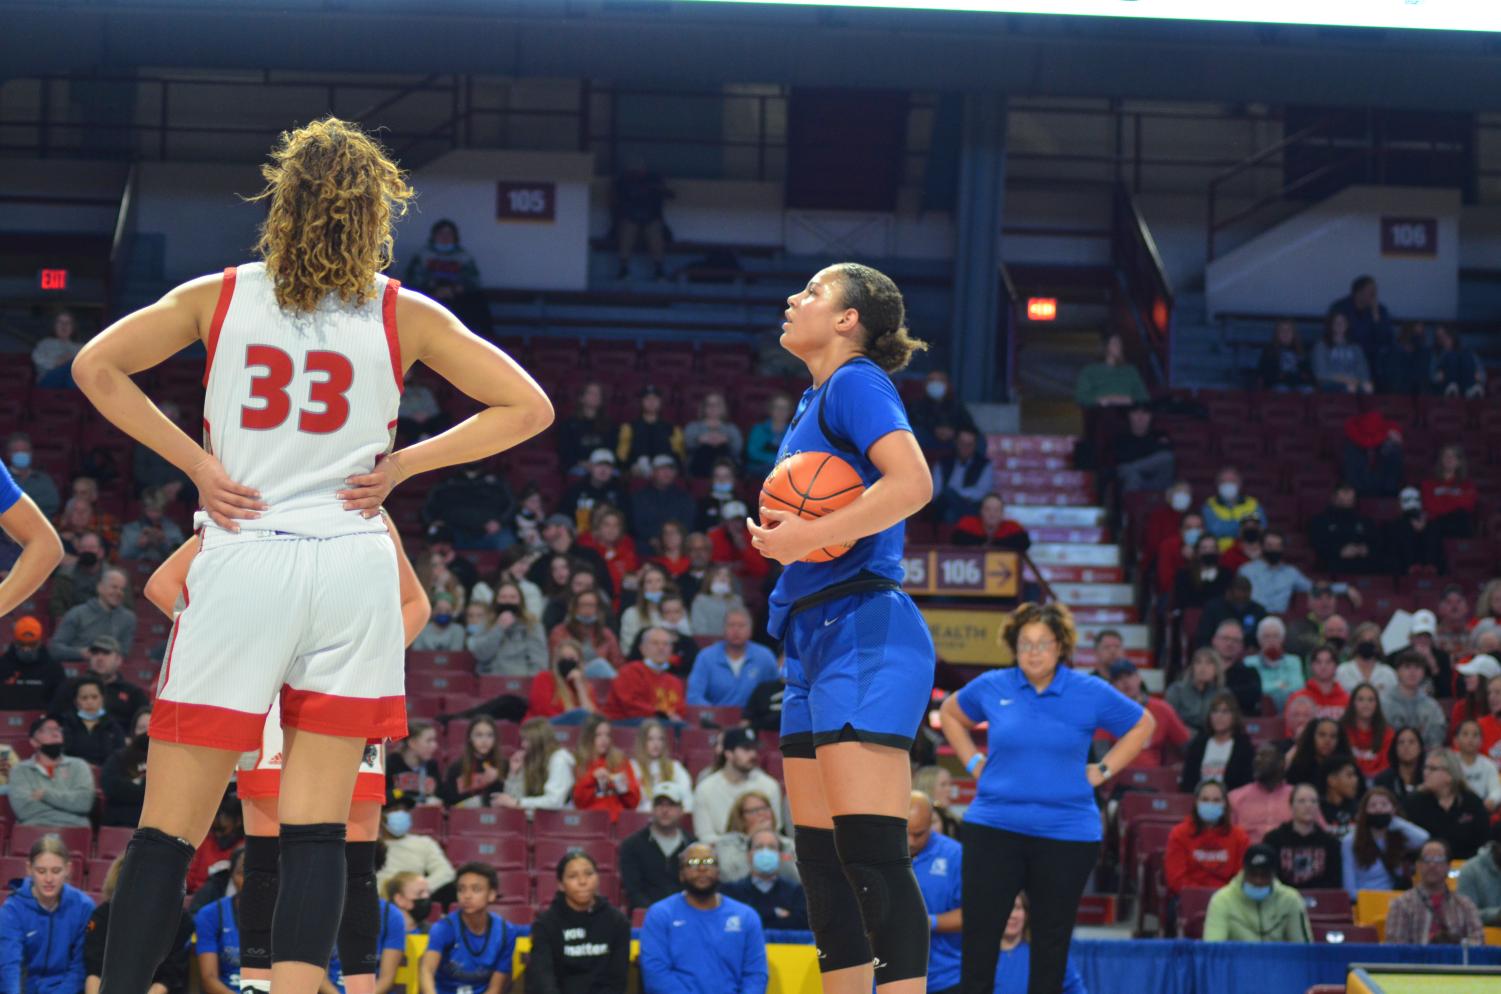 Gallery%3A+Day+1+of+state+tournament+HHS+Girls+Basketball+takes+on+Lakeville+North